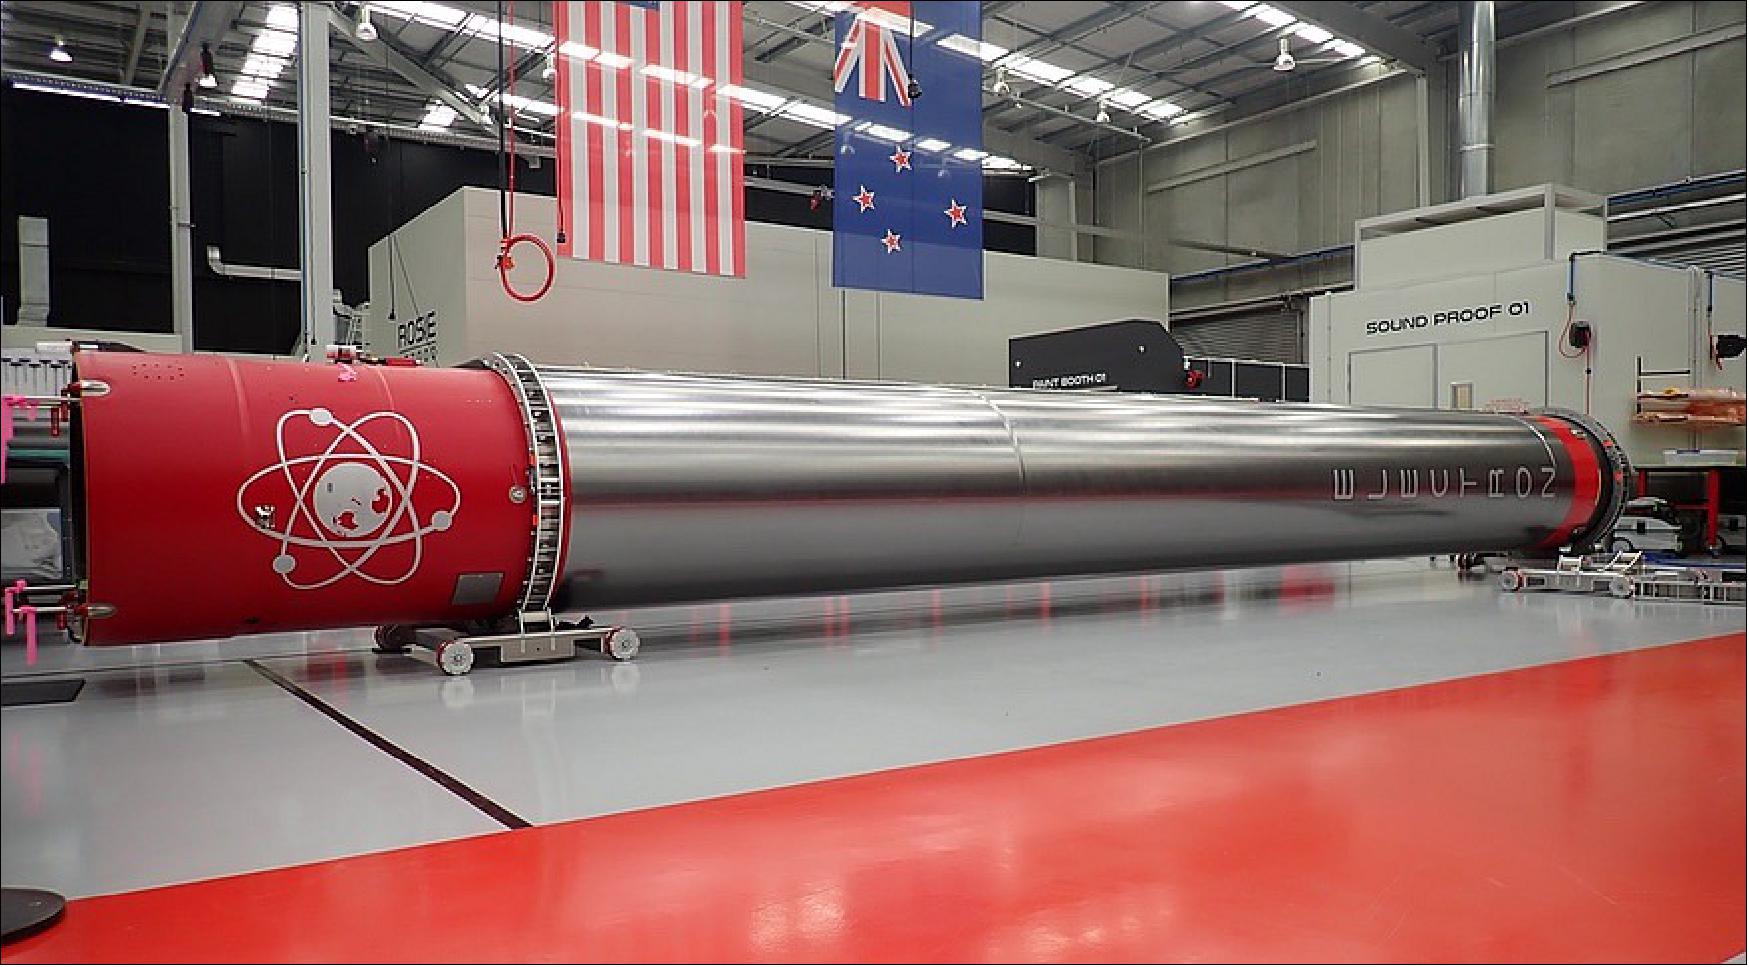 Figure 11: Rocket Lab is adding a new, silvery thermal protection film to the Electron first stage that will be used on the next attempt to recovery the booster, some time in the first half of 2022 (image credit: Rocket Lab)